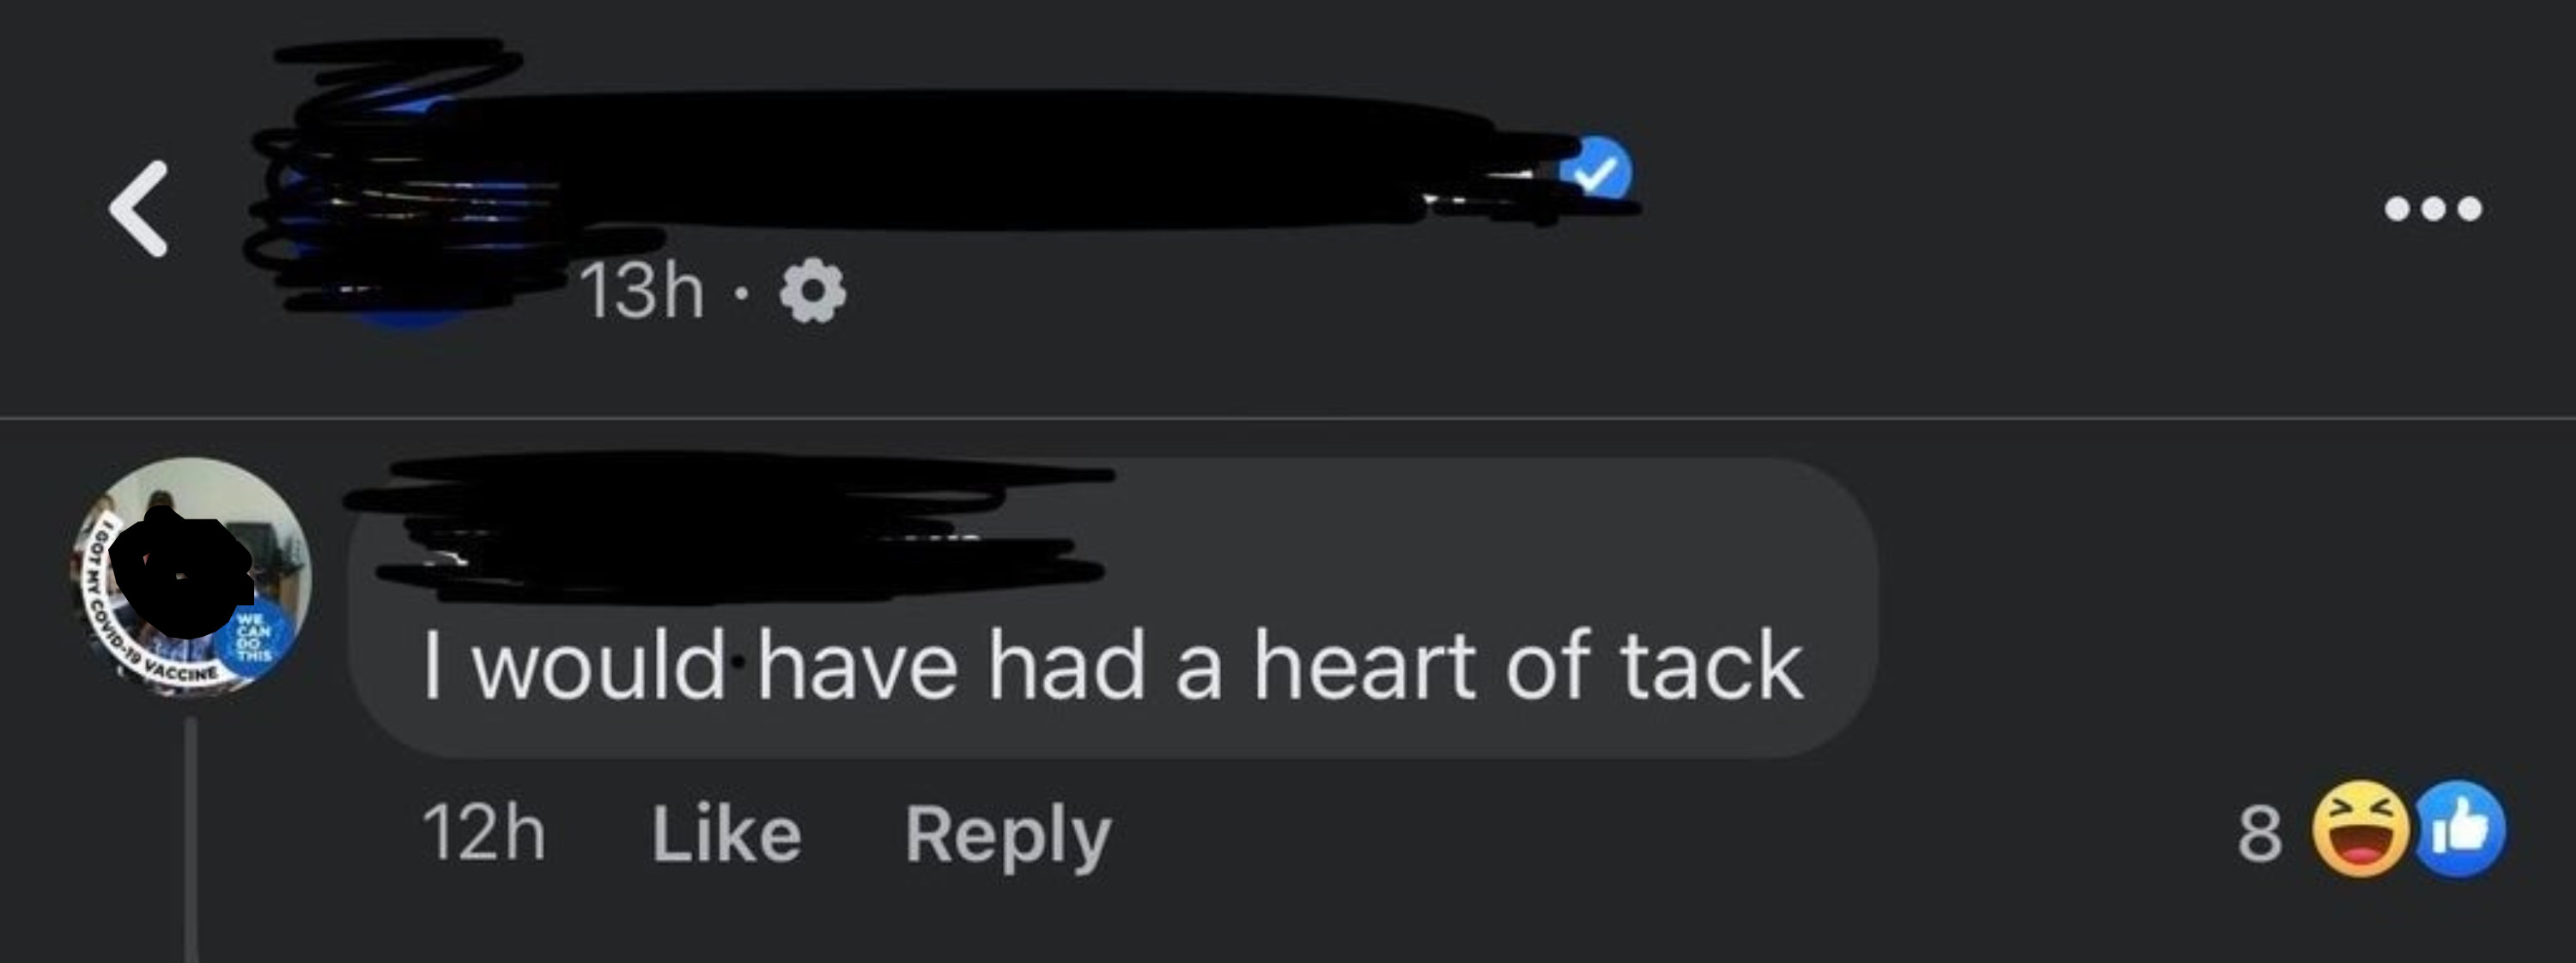 person saying heart of tack instead of heart aattack